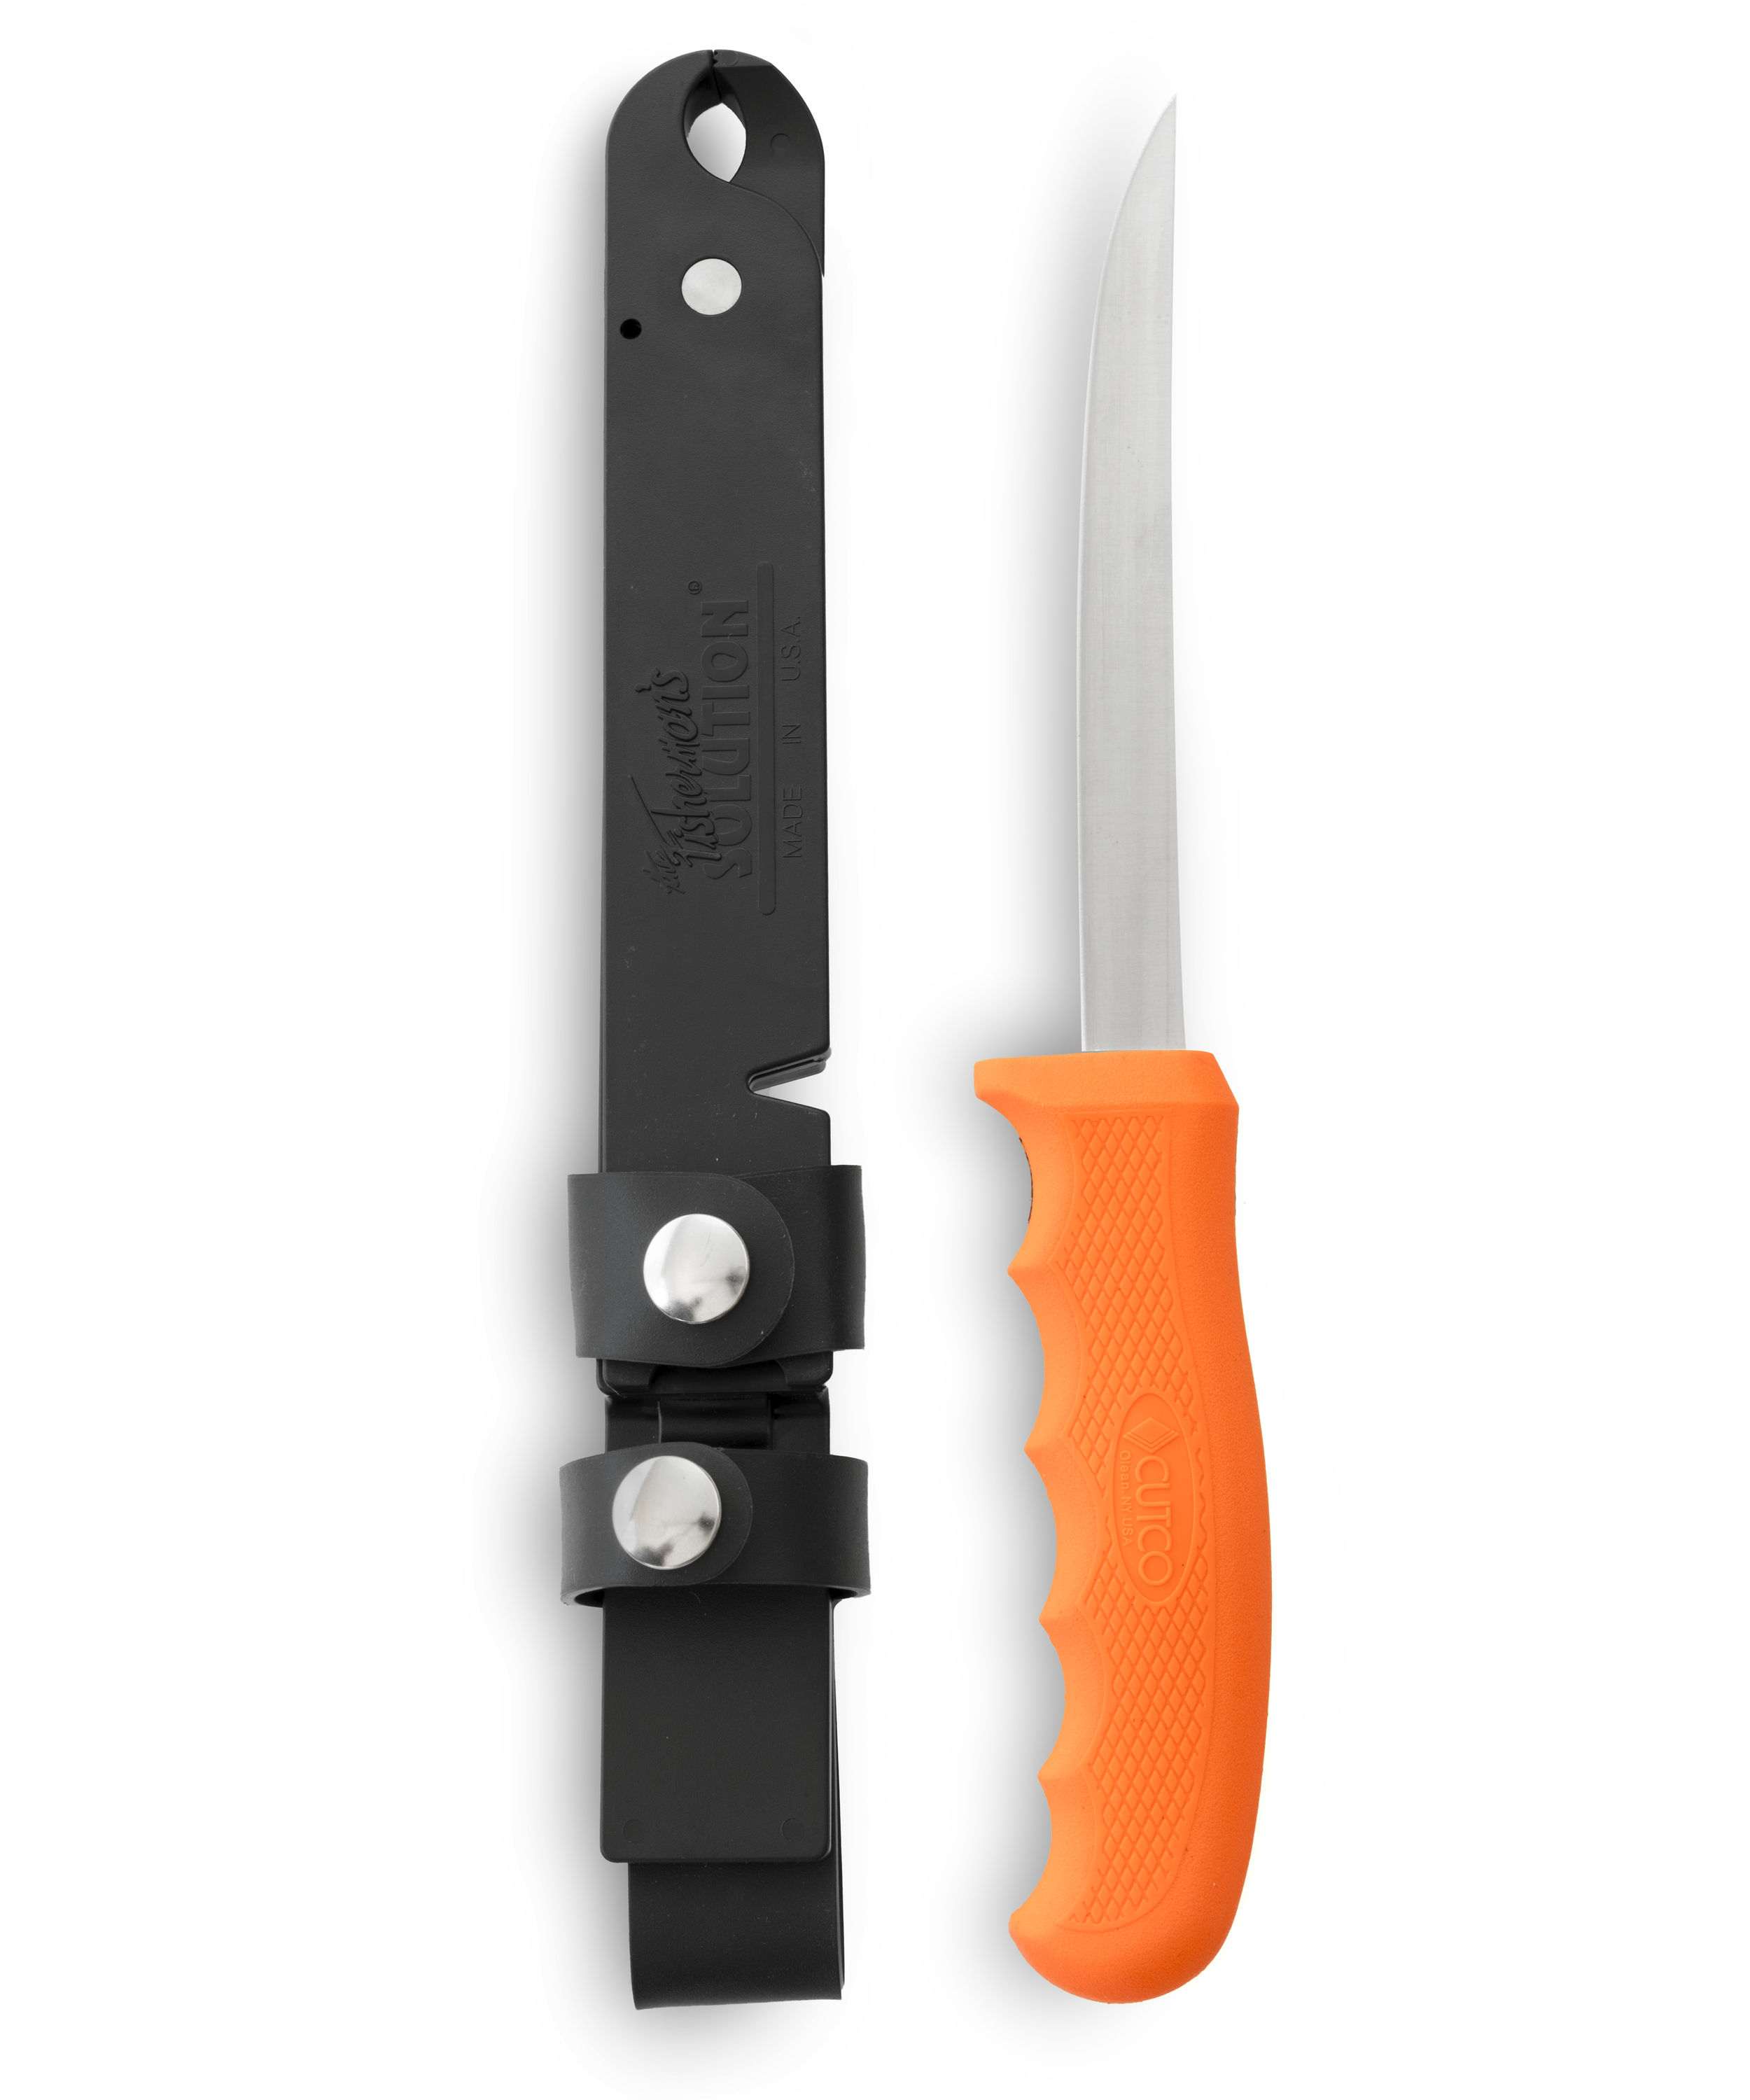 Fisherman's Solution Filet Knife With Sheath That Becomes Pliers. by Cutco  of Olean, NY 